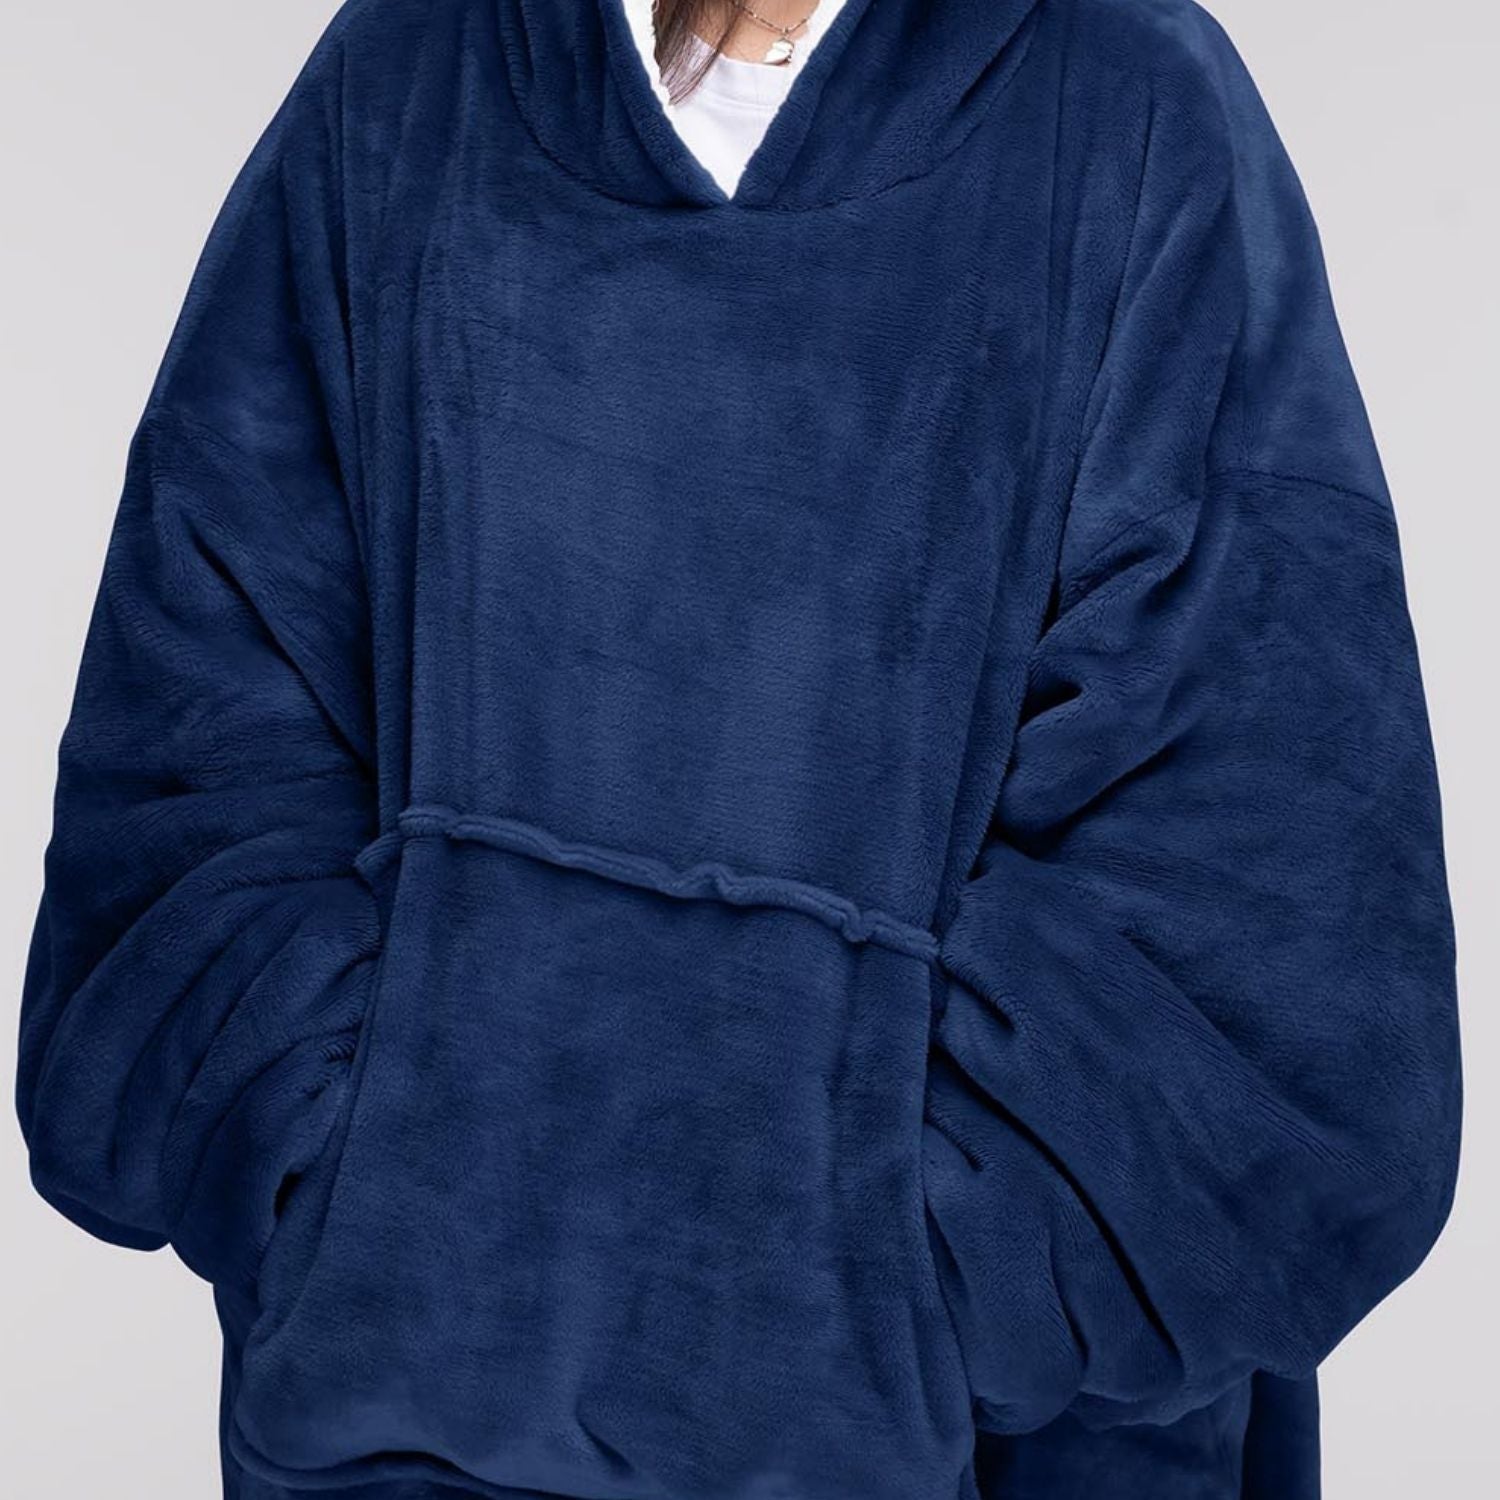 The Home Bedroom Cosy Robe - Navy 3 Shaws Department Stores